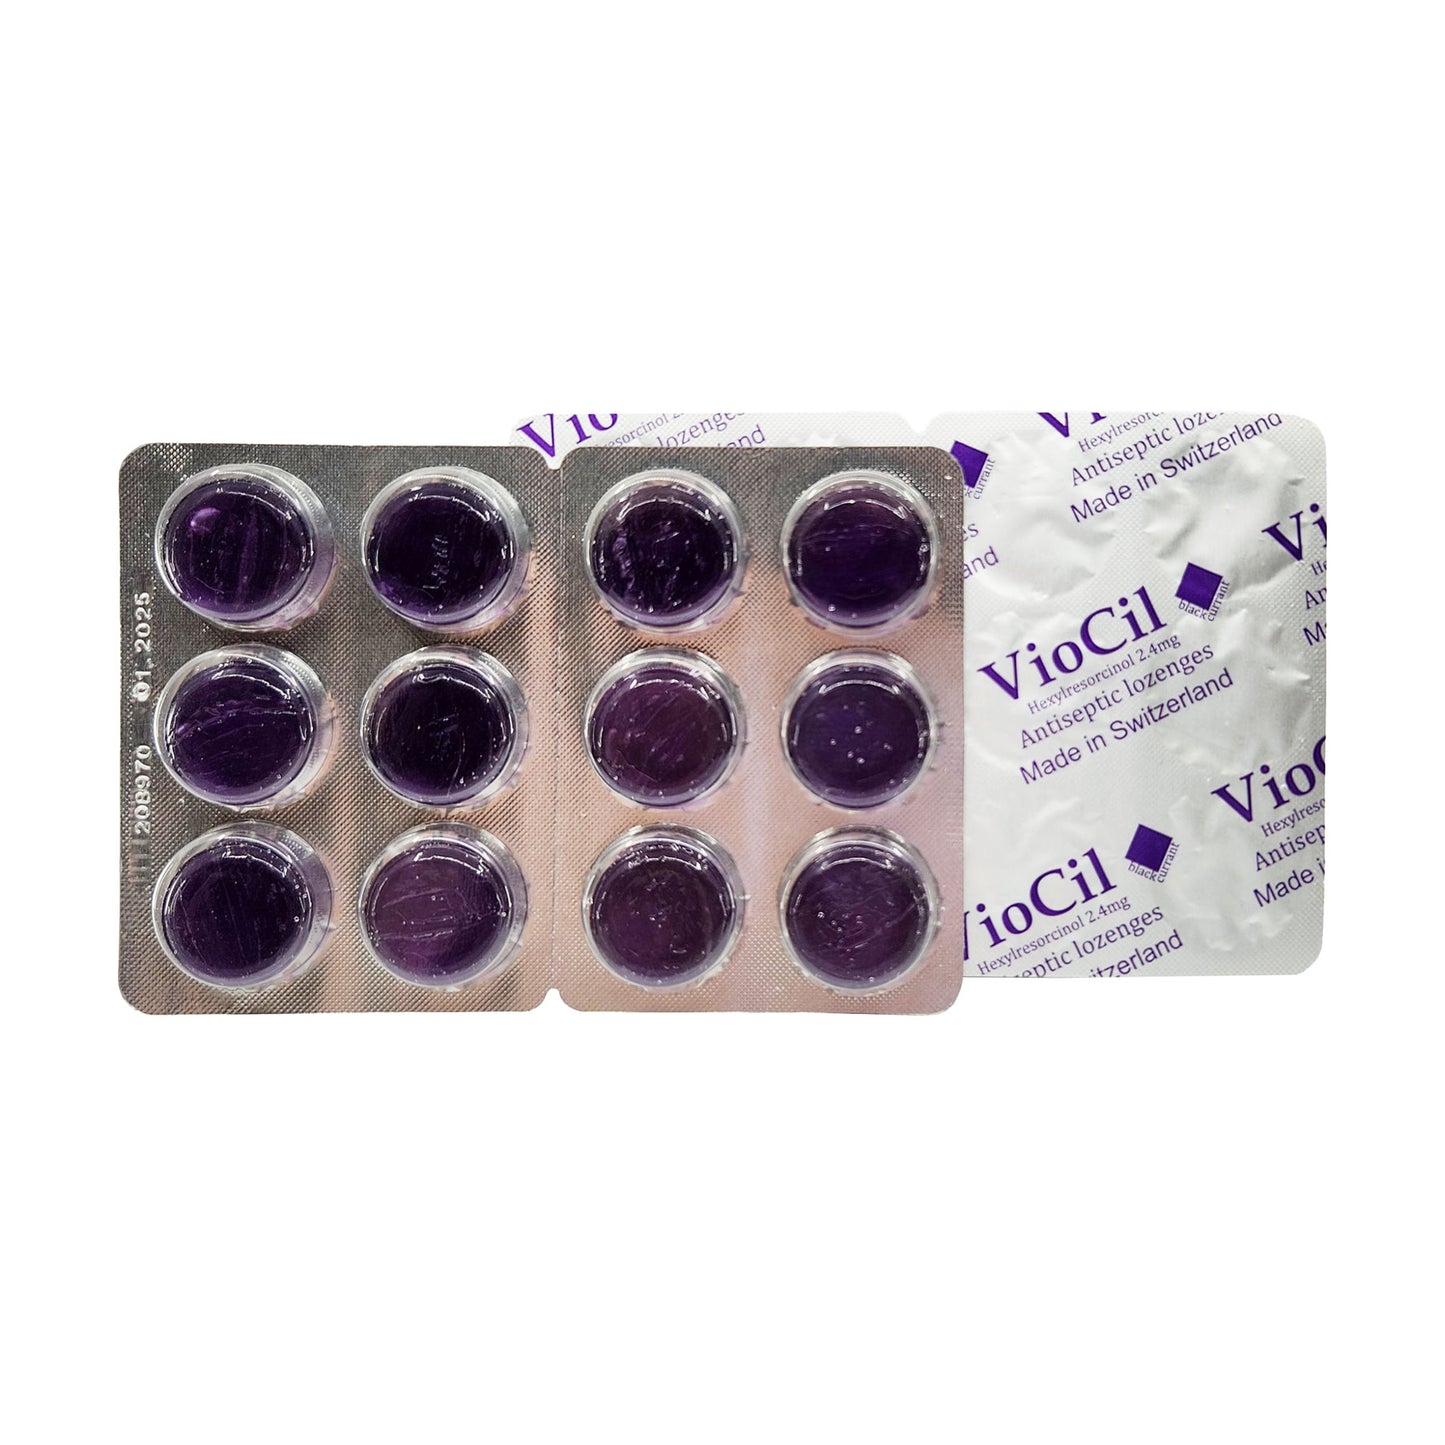 Viocil Lozenges Front and Back